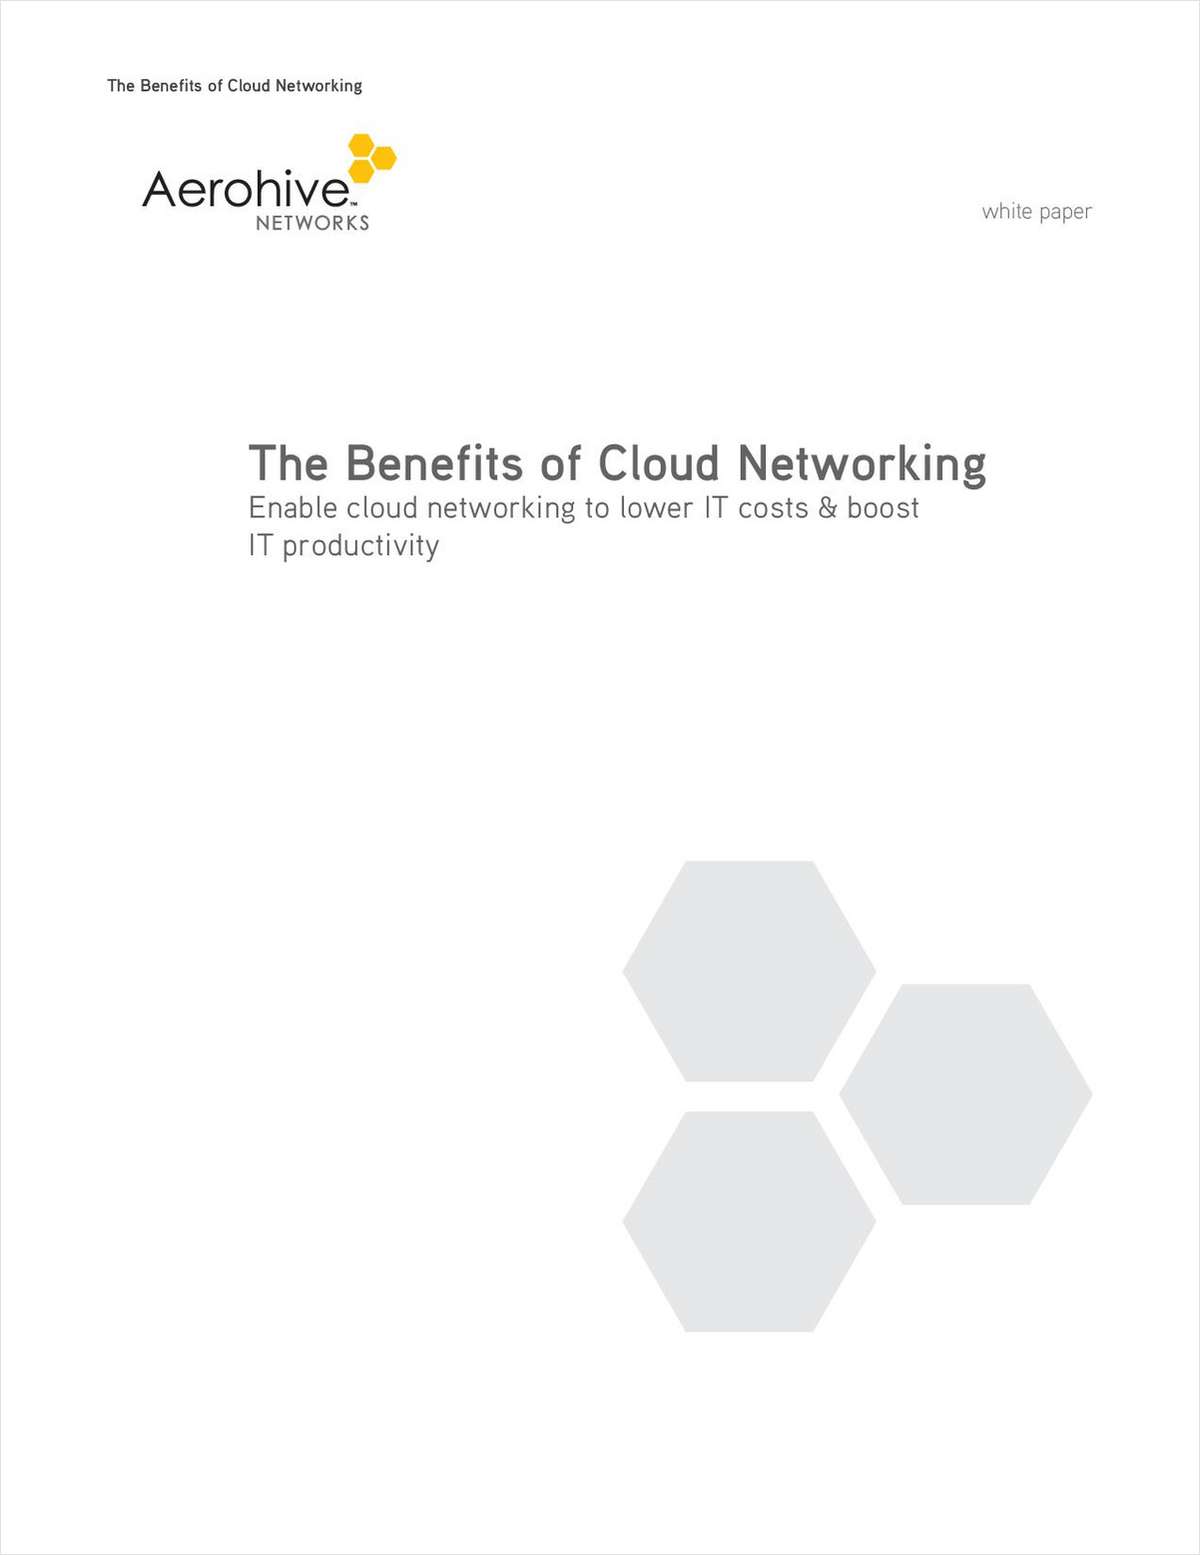 The Benefits of Cloud Networking